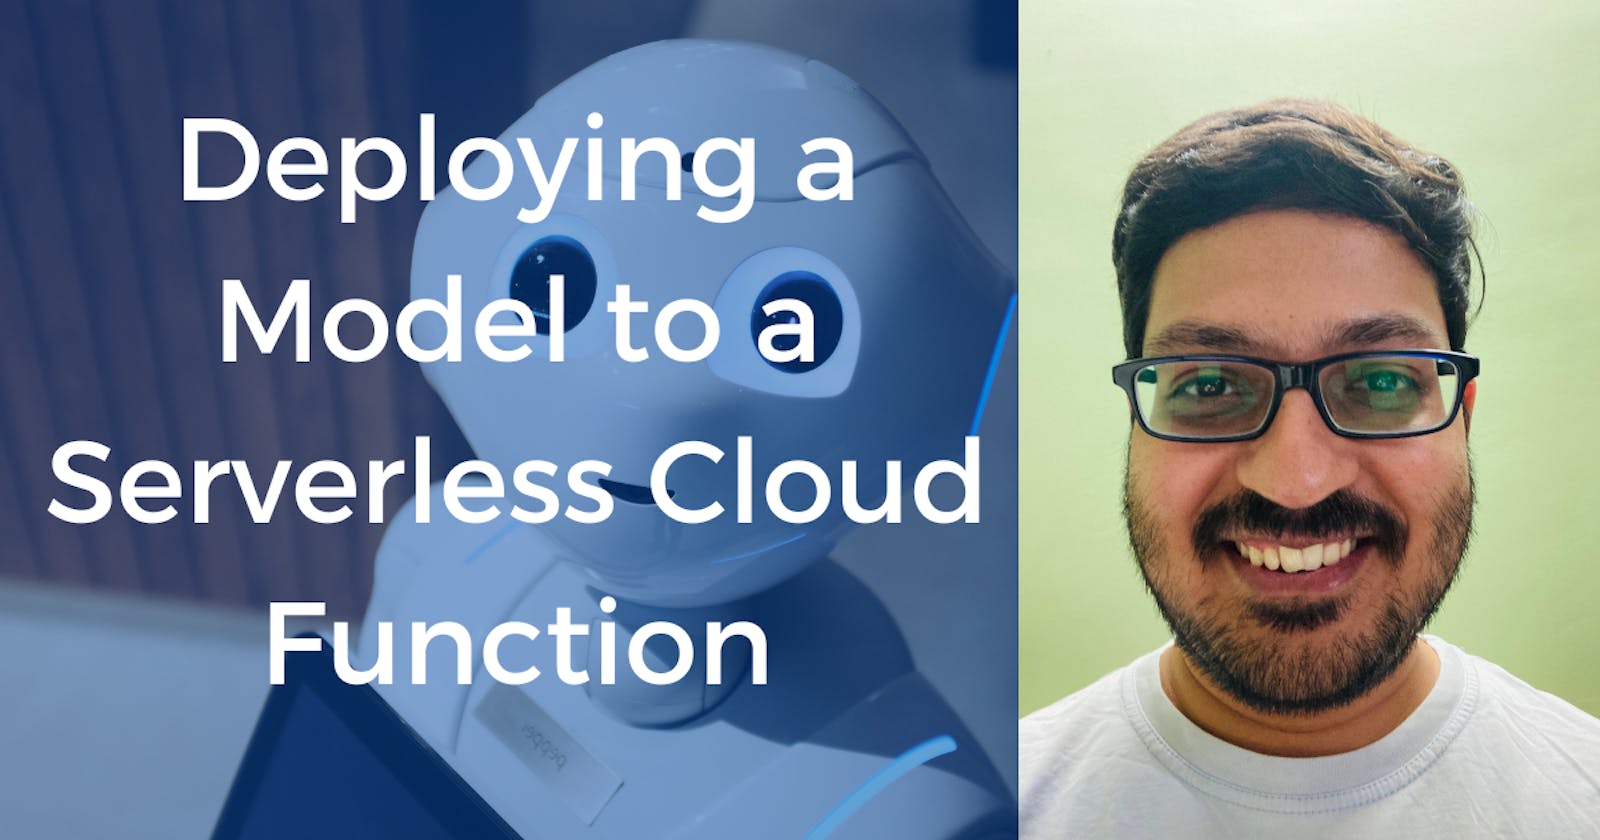 Deploying a Model to a Serverless Cloud Function